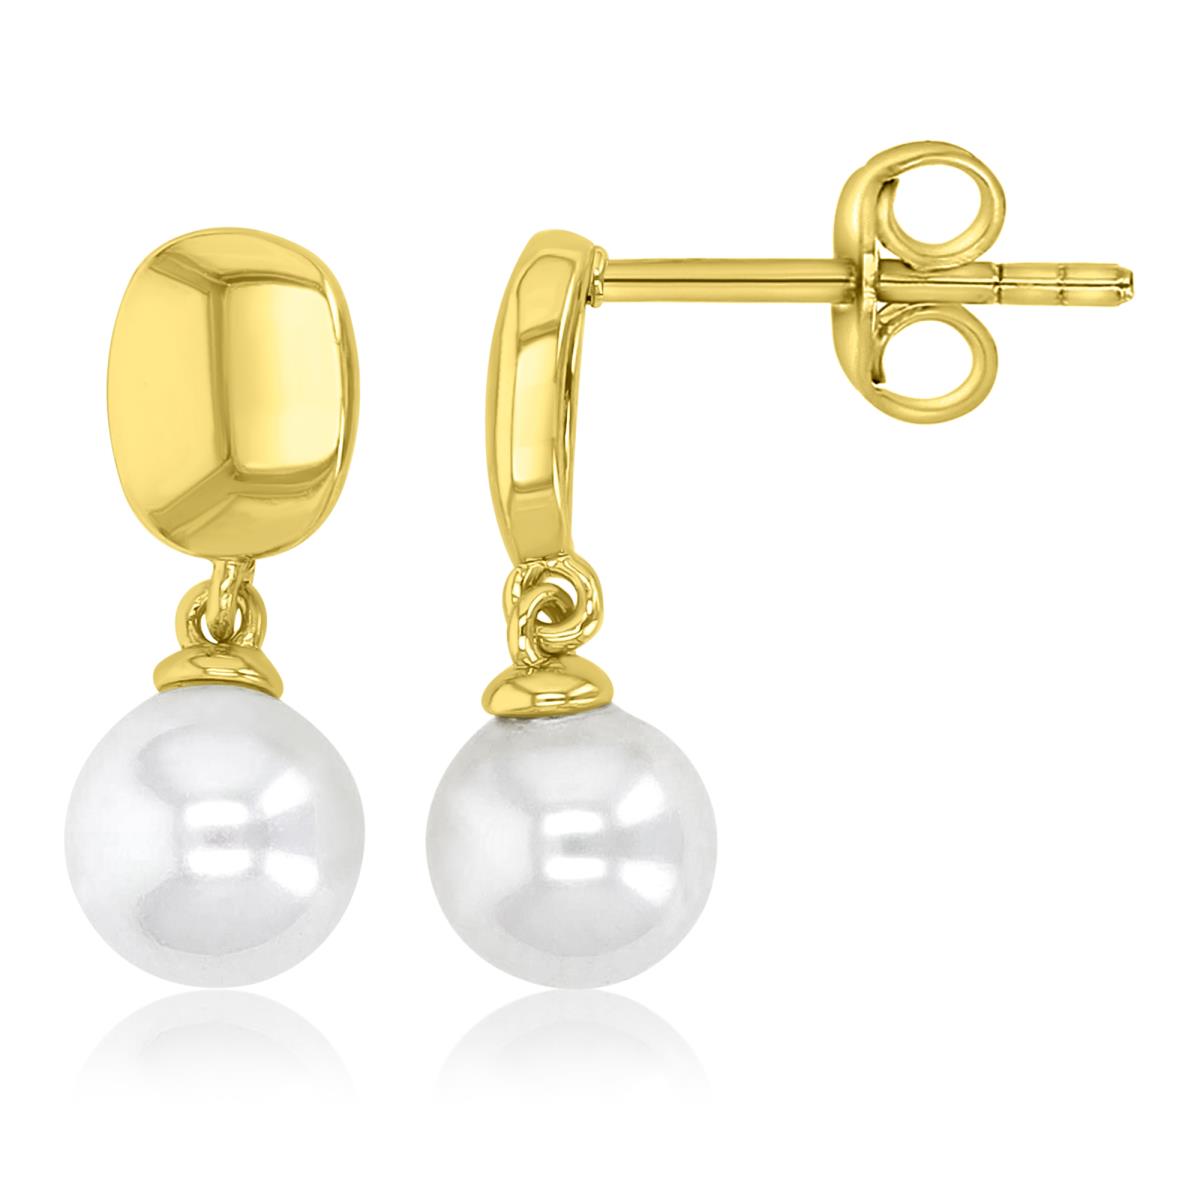 Brass Yellow 18mm Oval Stud & Simulated Pearl Drop Earrings